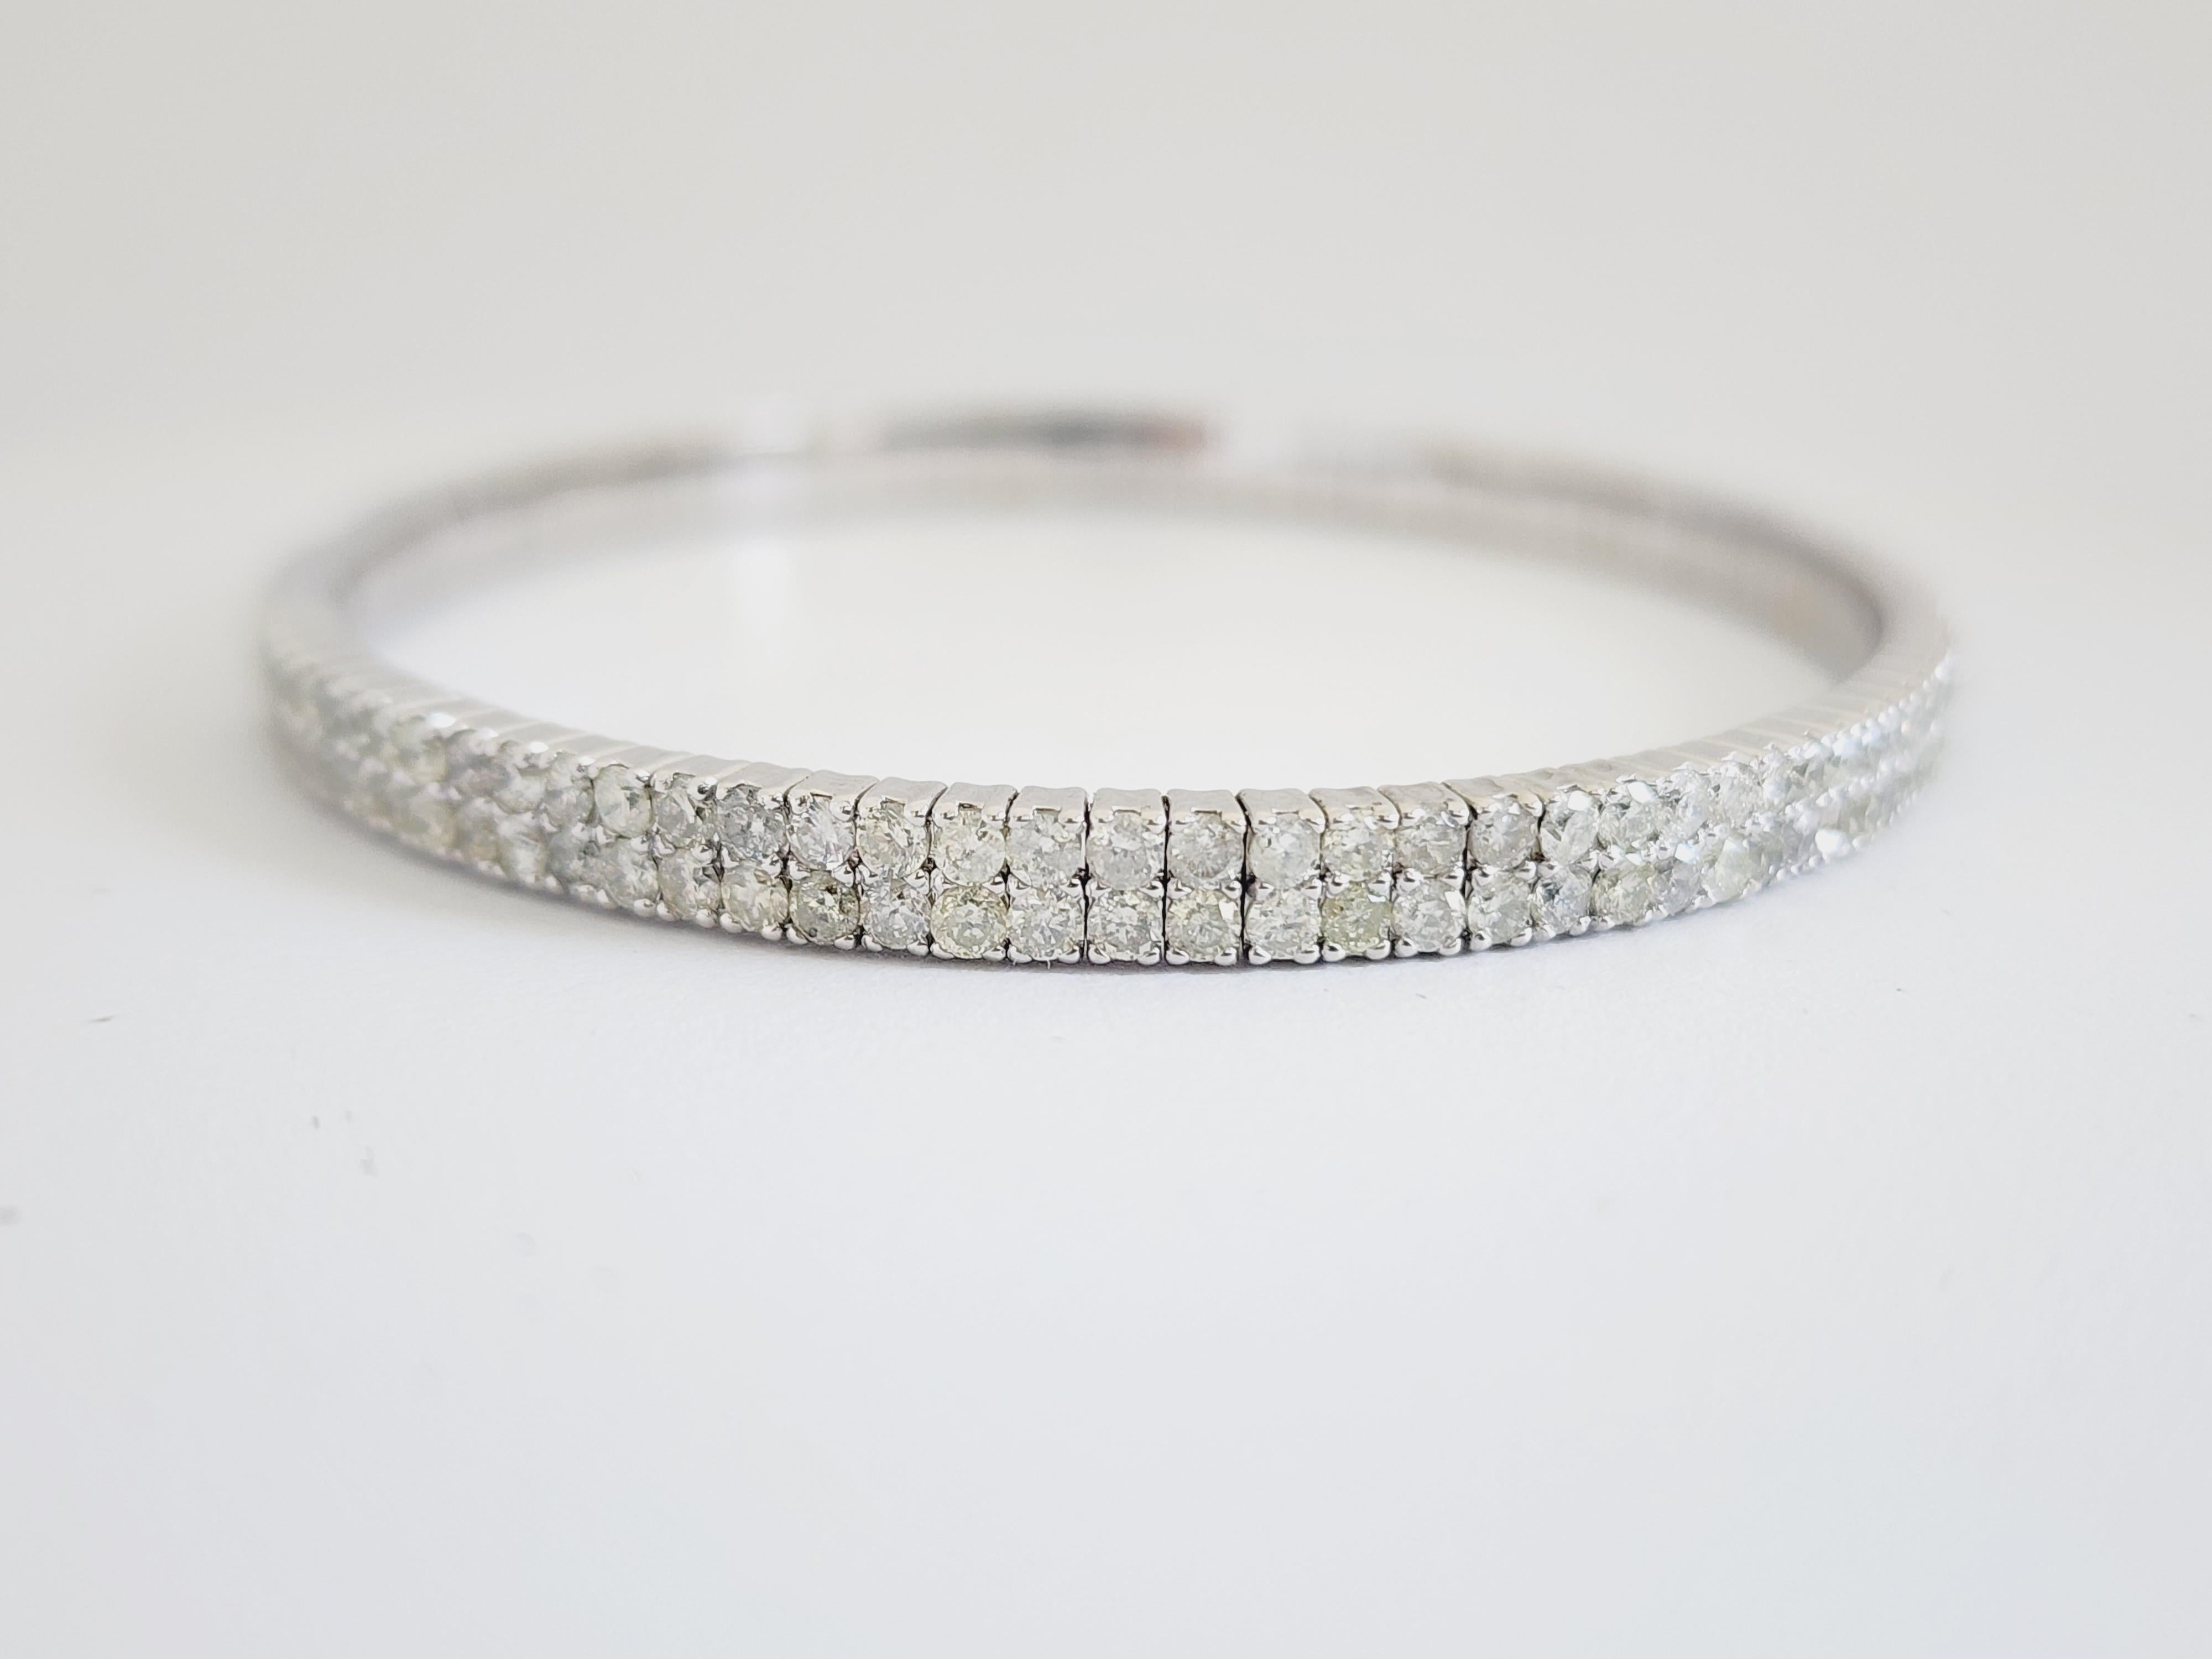 4.90 Carat Double Row Flexible Bangle White Gold 14 Karat Bracelet In New Condition For Sale In Great Neck, NY